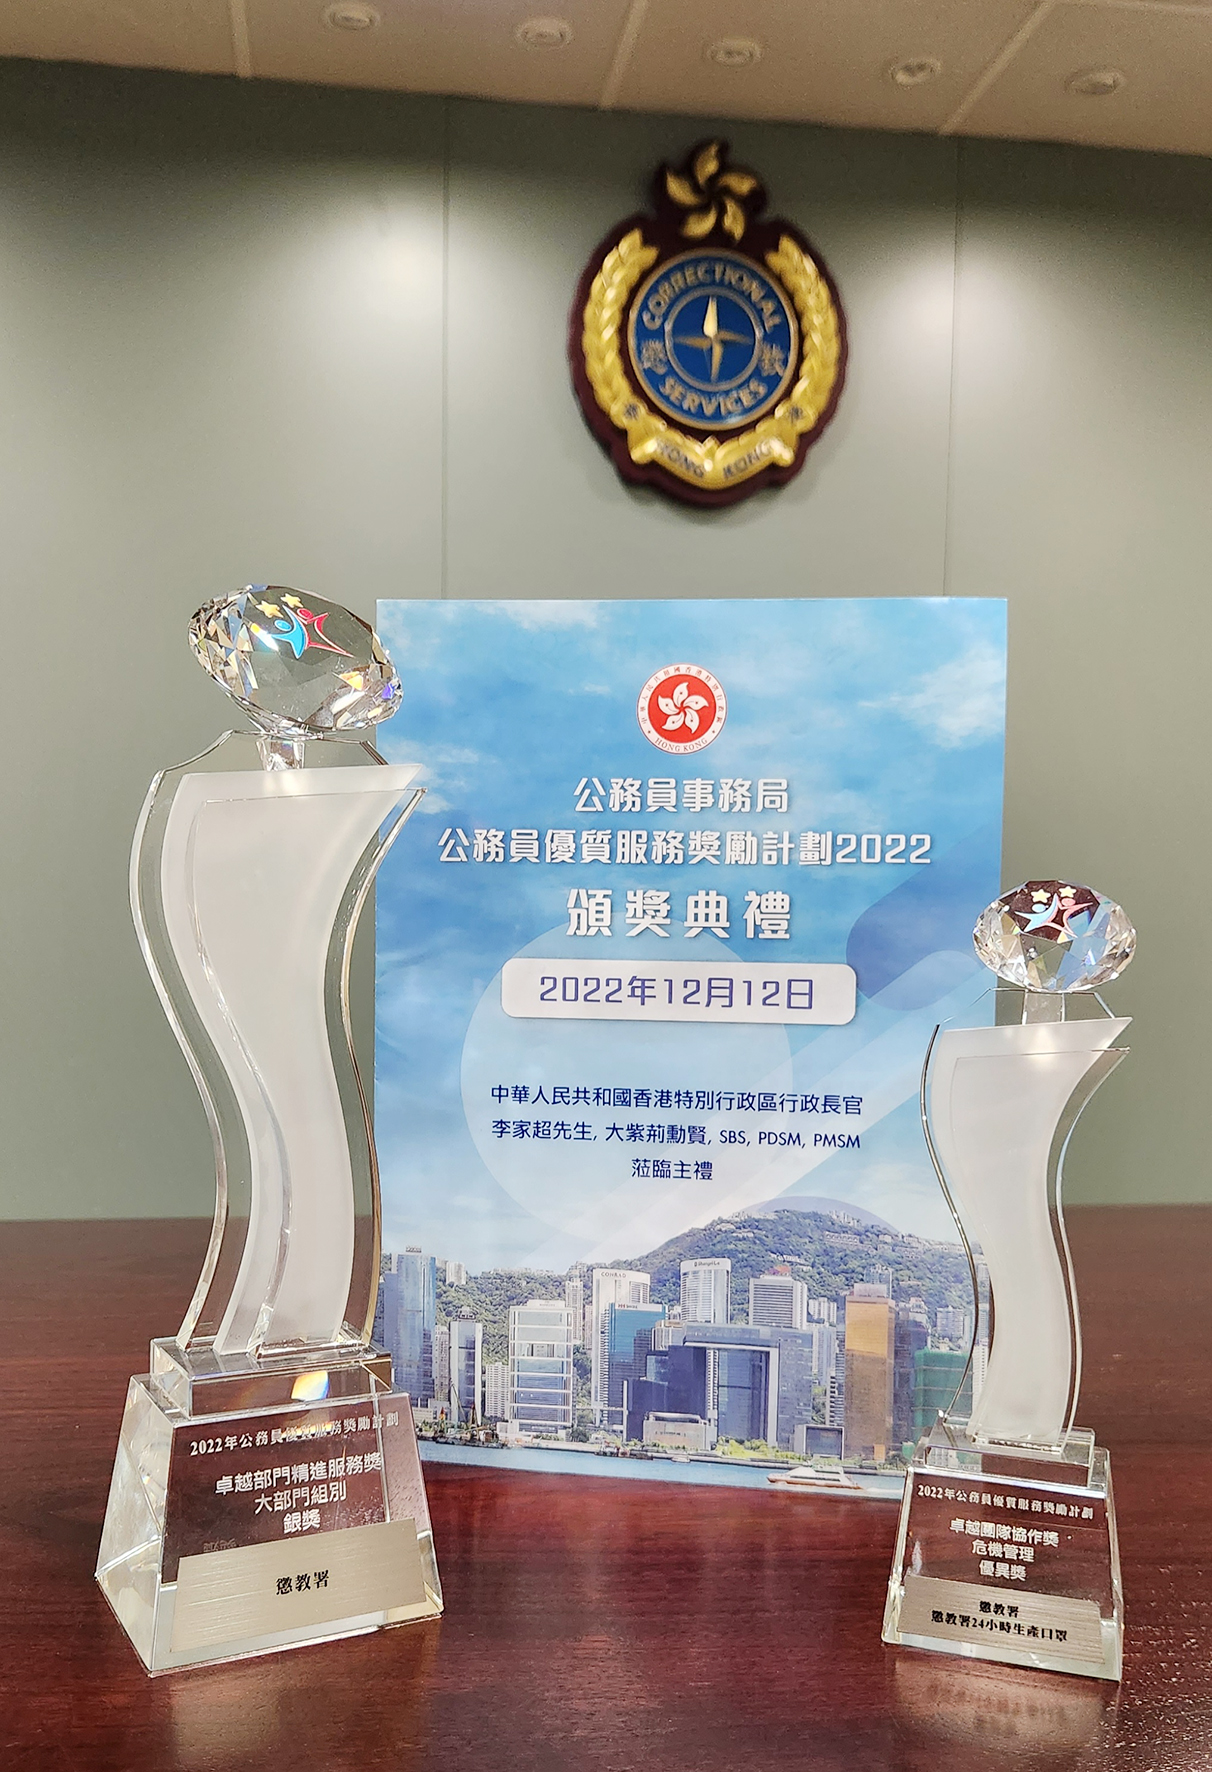 The Department wins the Silver Prize of the “Excellence in Service Enhancement (Large Department Category)” with “Develop Smart Prison - Create a Brand New Management Model”.